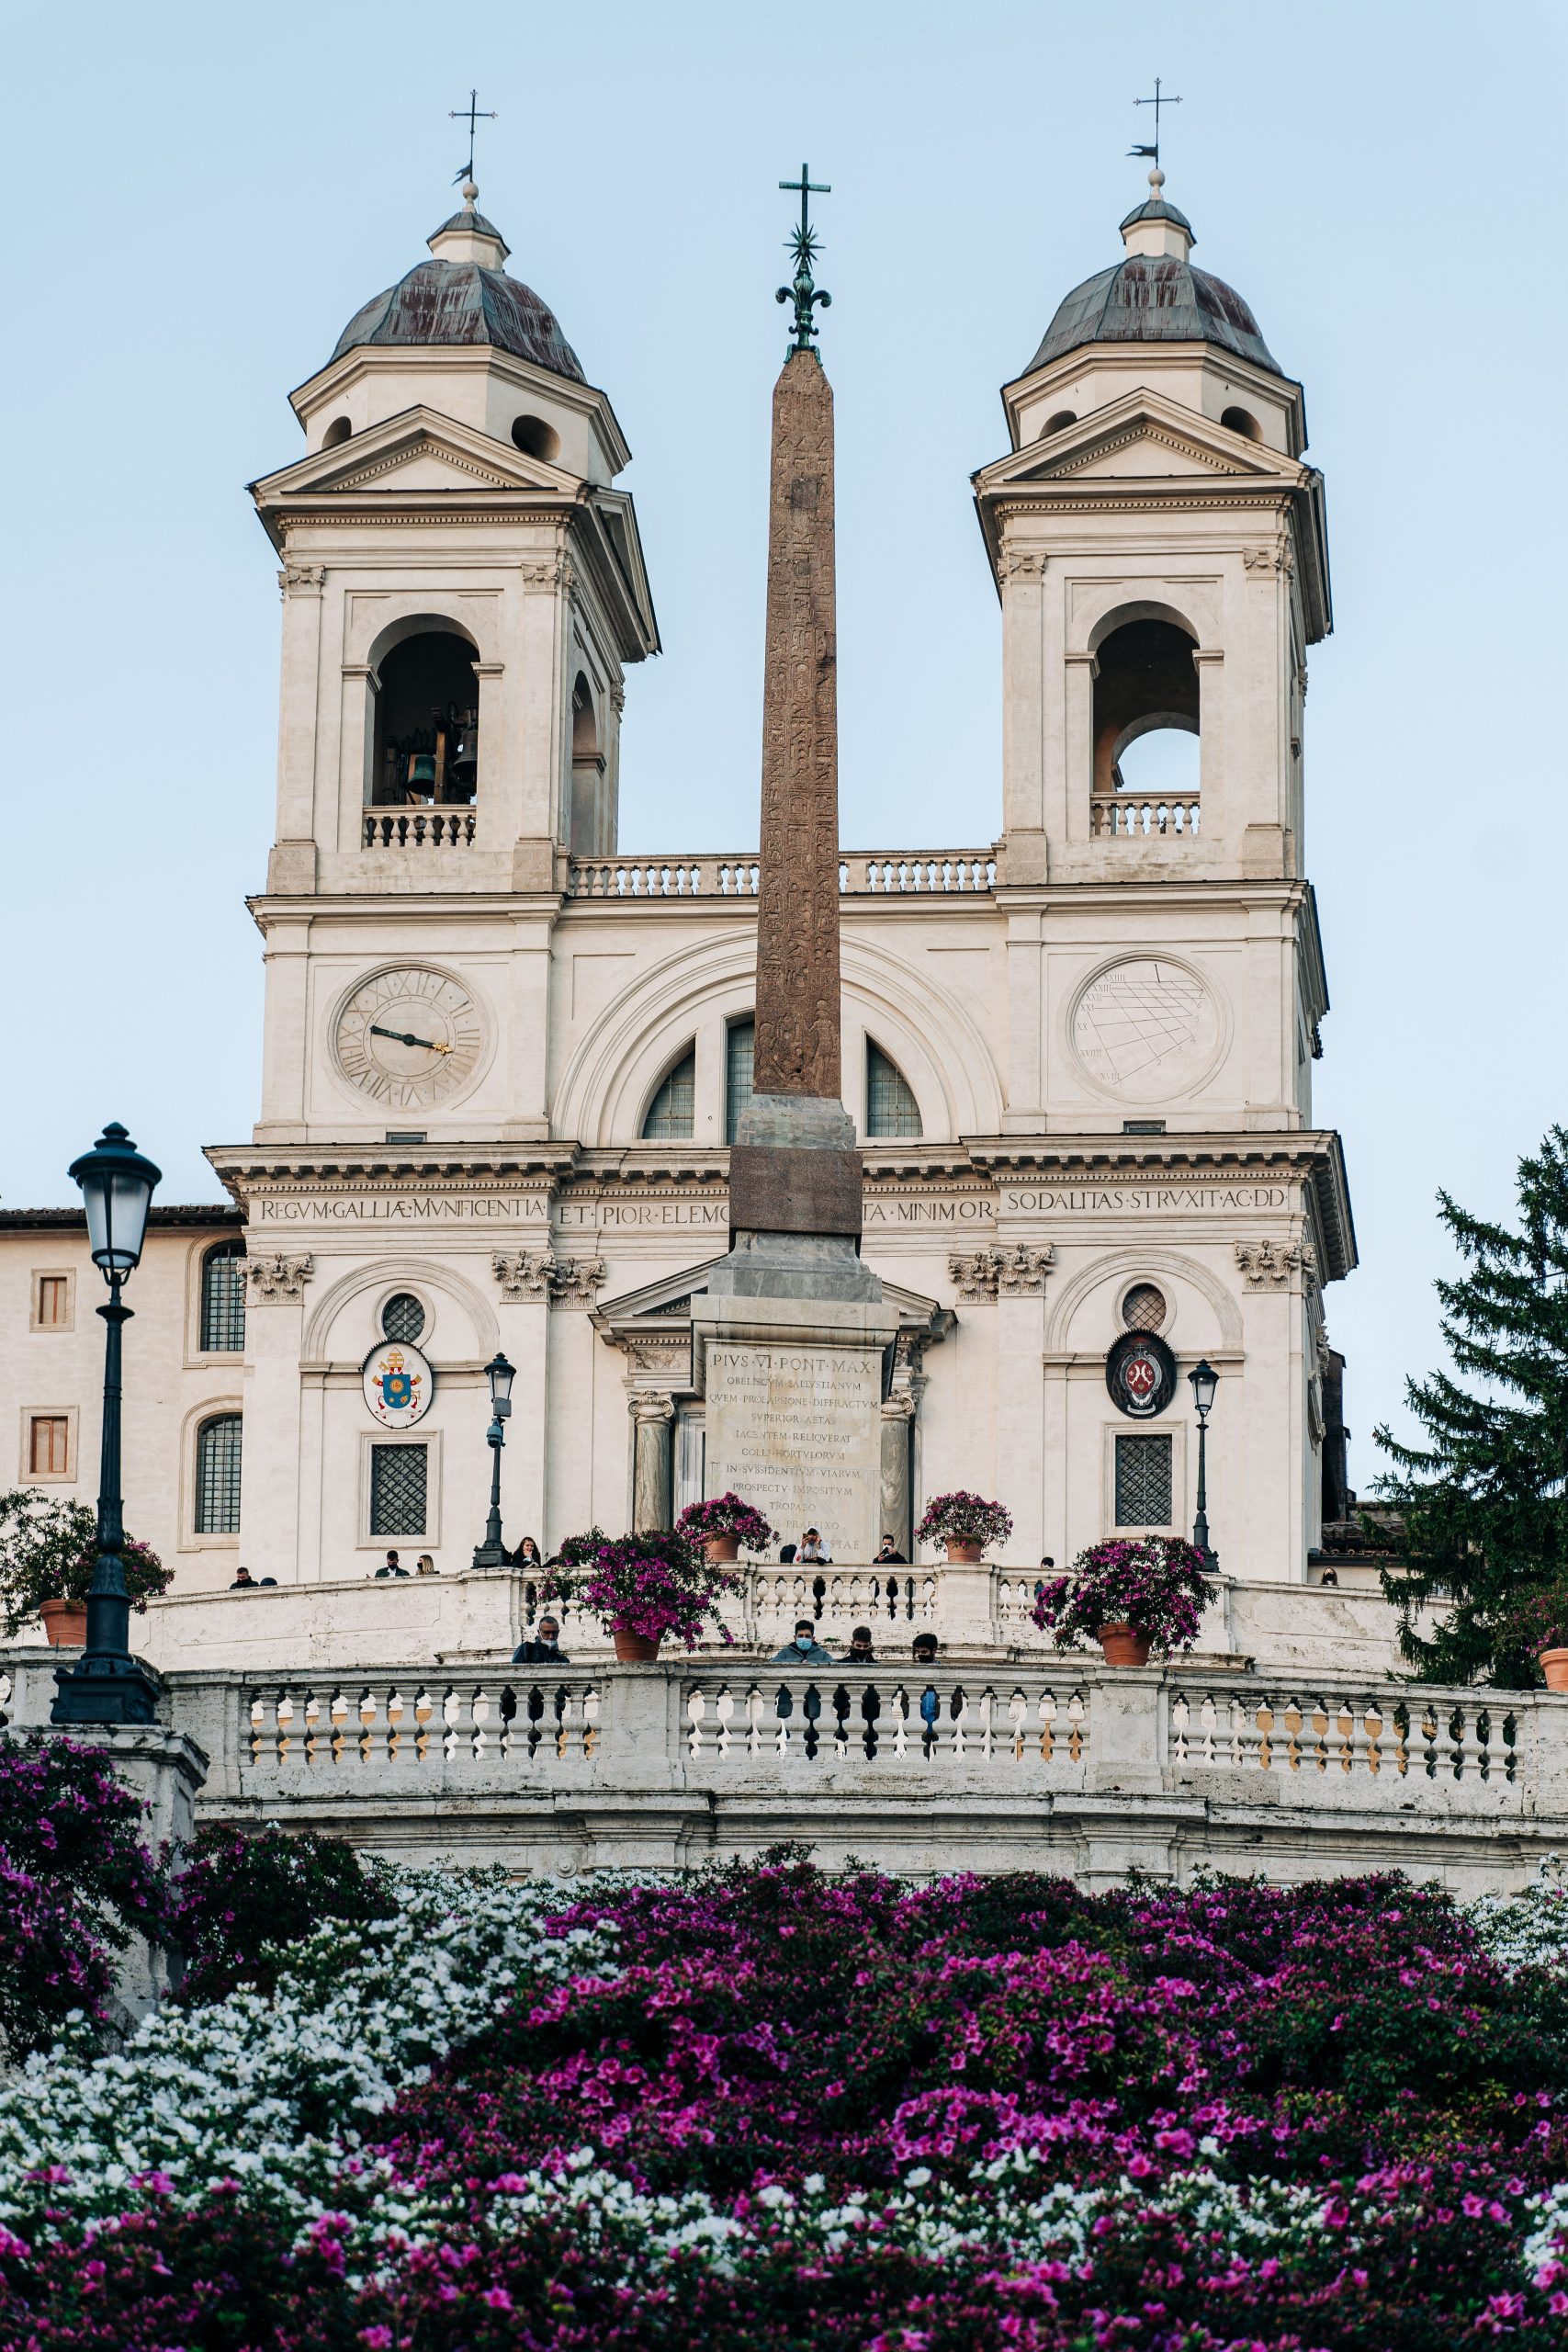 Spanish Steps with flowers in blossom